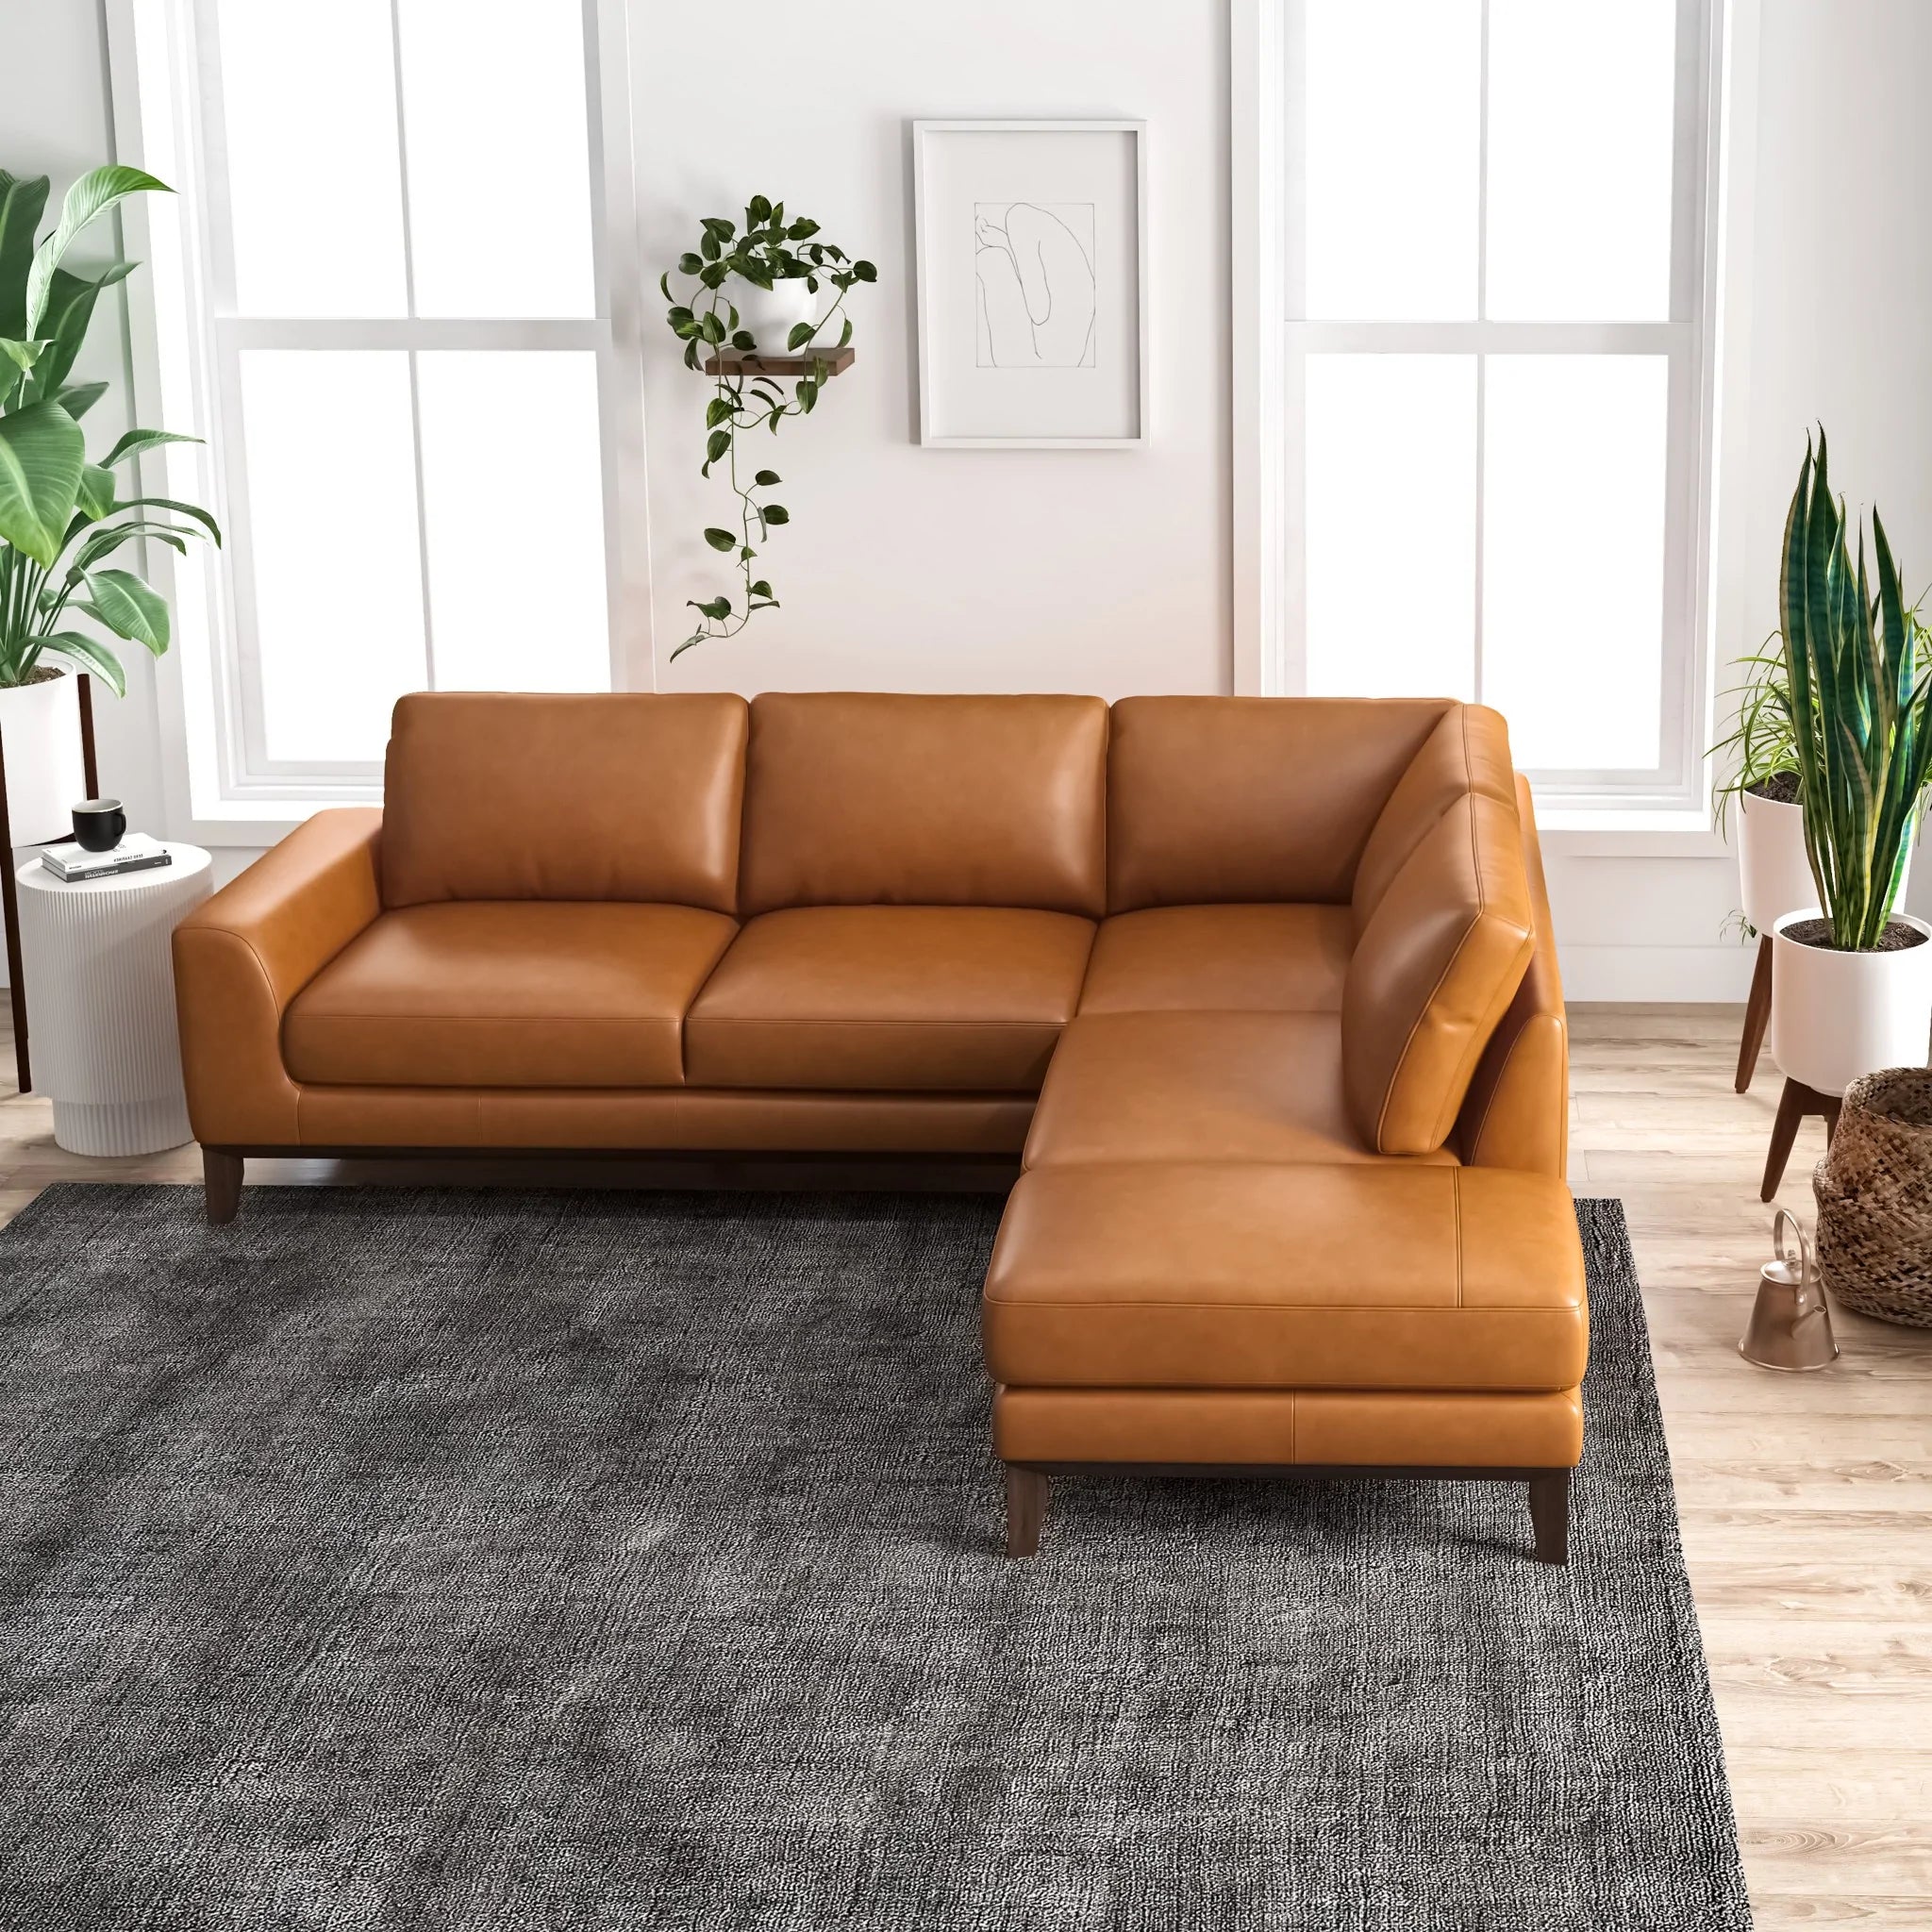 Seminar transfusion Ejeren May 2-Piece Full Grain Leather Mid Century Modern Sectional Sofa in Tan3 |  ASY Furniture | Houston TX to US